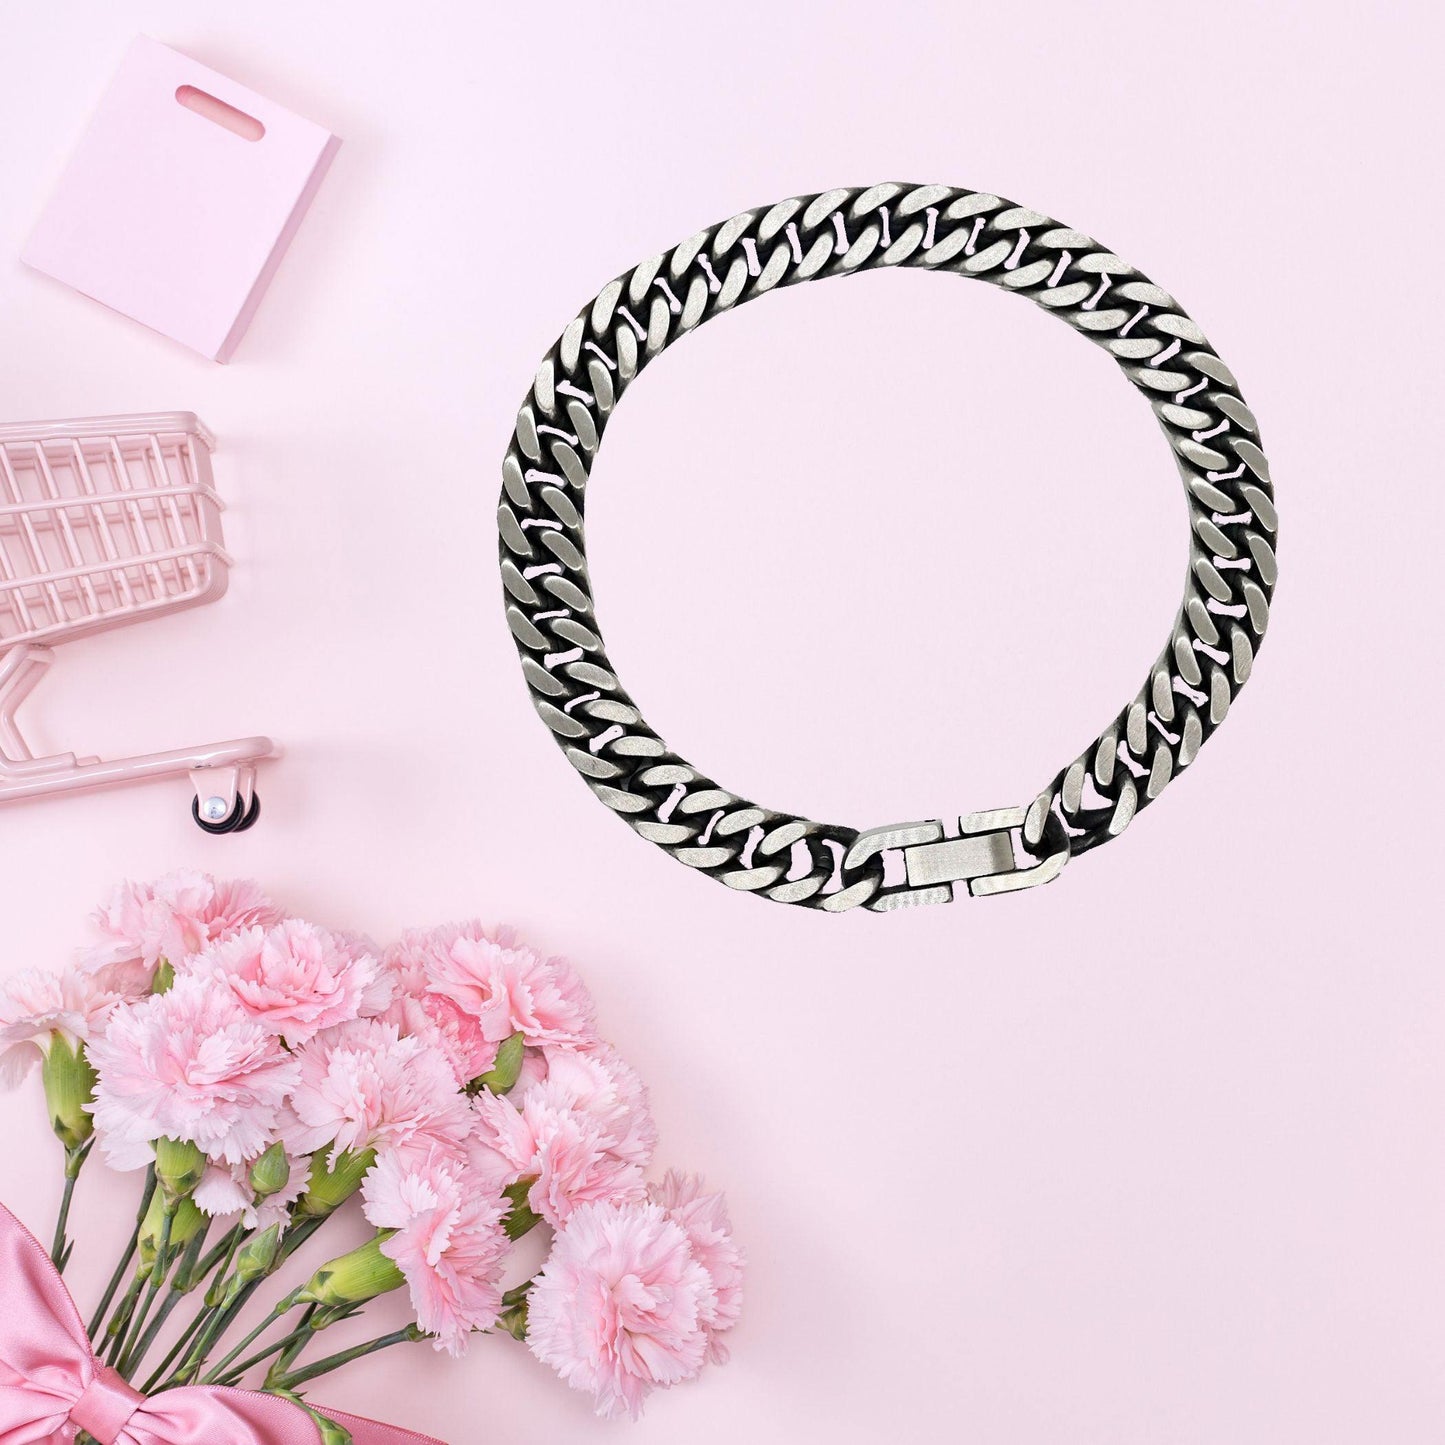 Godmother Cuban Link Chain Bracelet Always follow your dreams, never forget how amazing you are Birthday Christmas Mother's Day Gifts - Mallard Moon Gift Shop